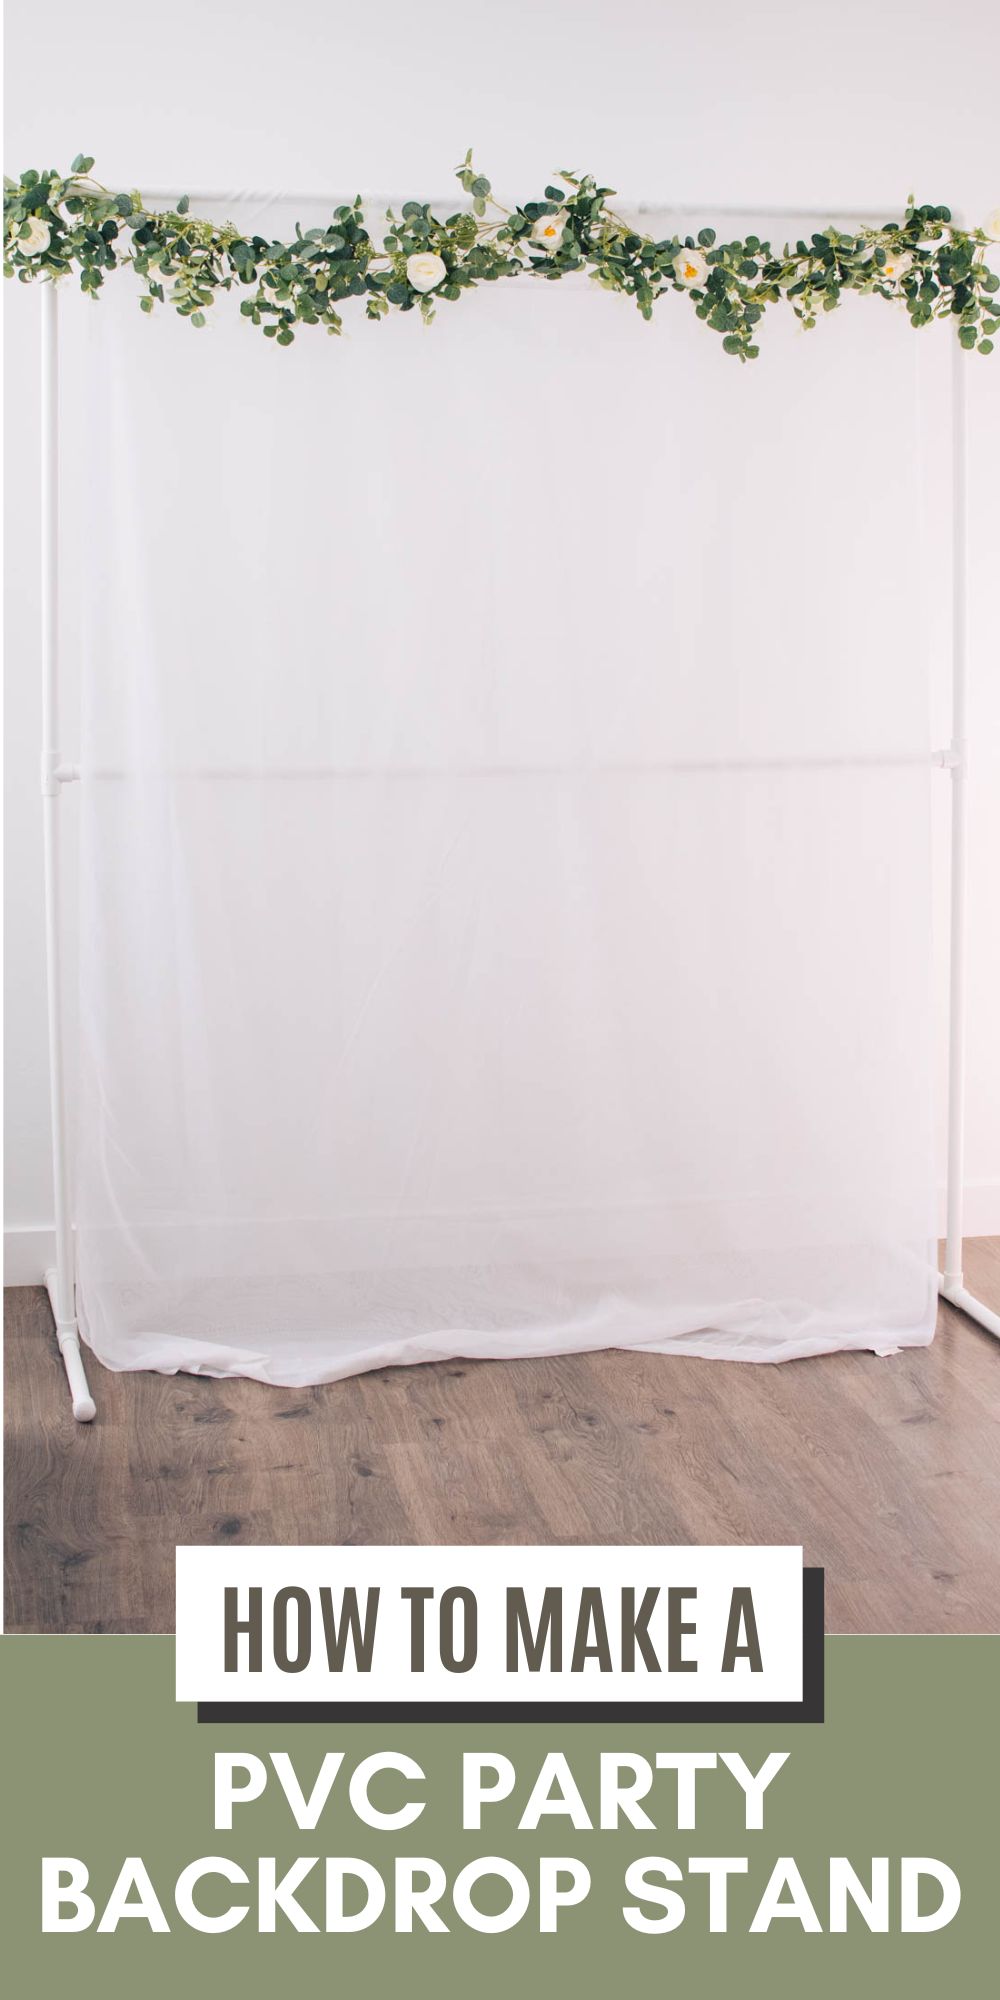 Pinterest graphic with text and photo of PVC pipe backdrop with sheer curtain and floral garland.